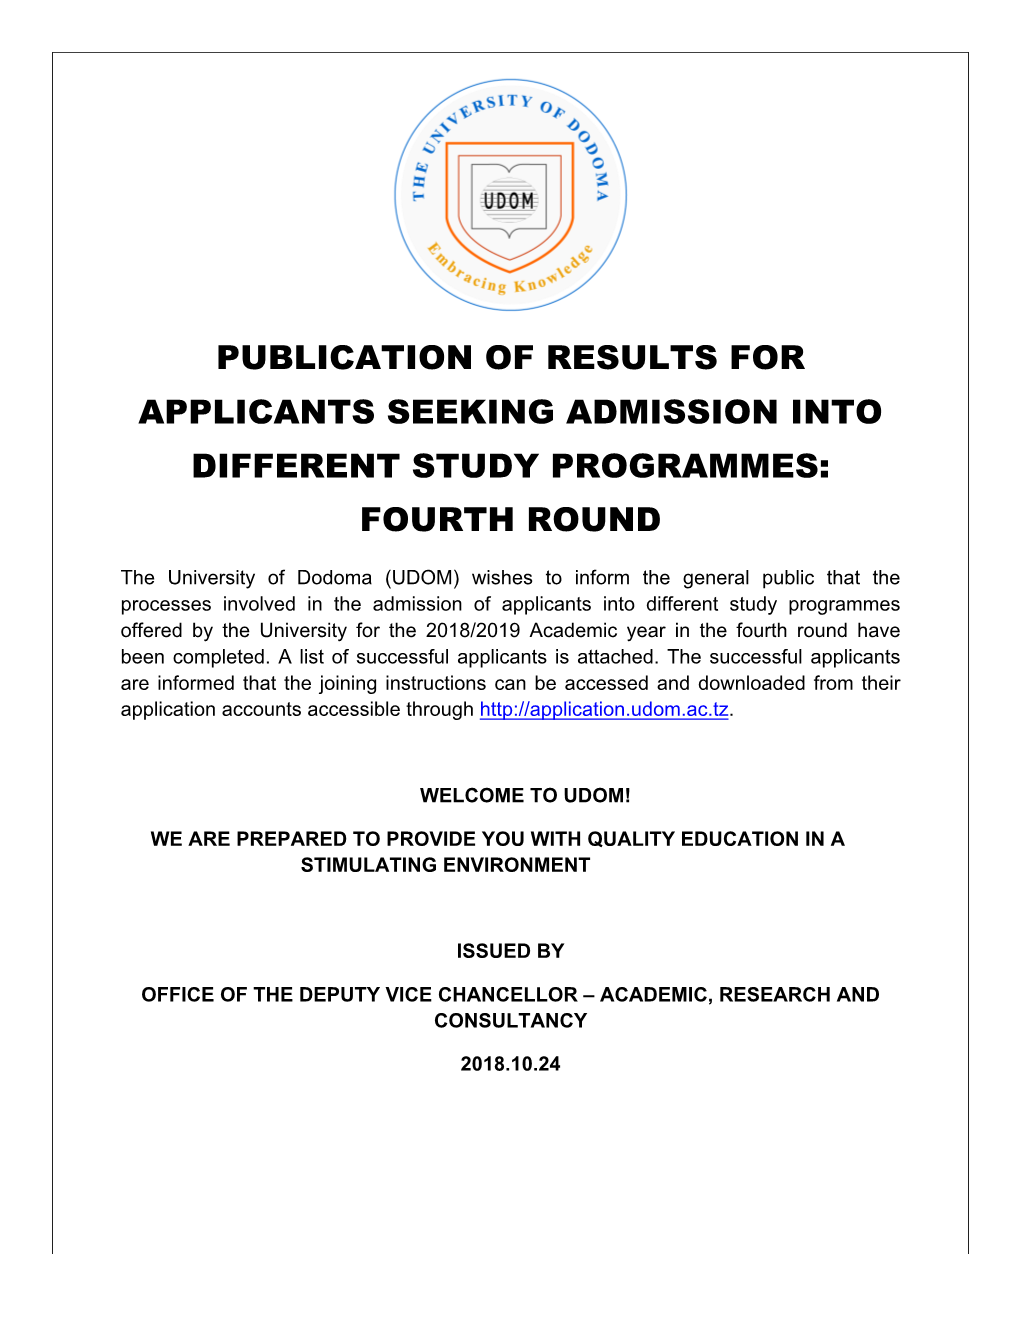 Publication of Results for Applicants Seeking Admission Into Different Study Programmes: Fourth Round